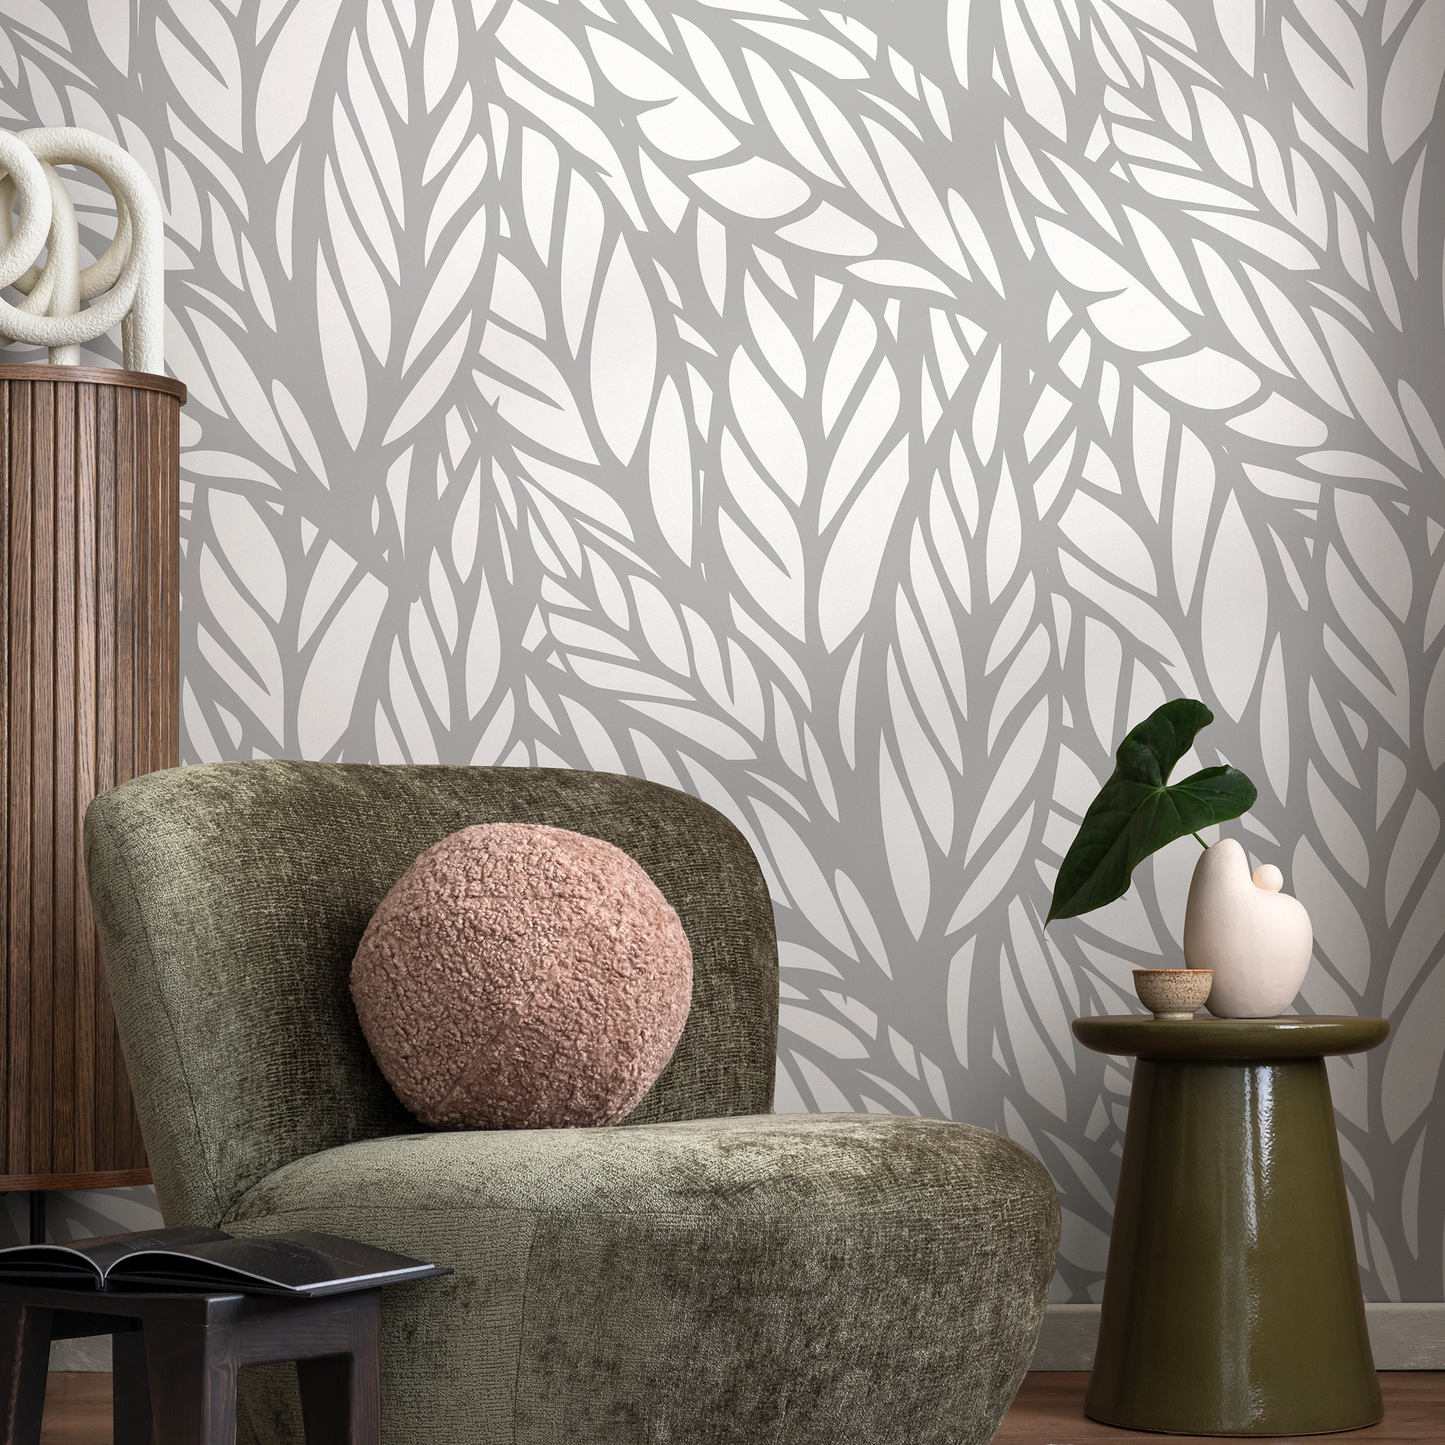 Wallpaper Peel and Stick Wallpaper Removable Wallpaper Home Decor Wall Art Wall Decor Room Decor / Gray Modern Leaves Wallpaper - A097